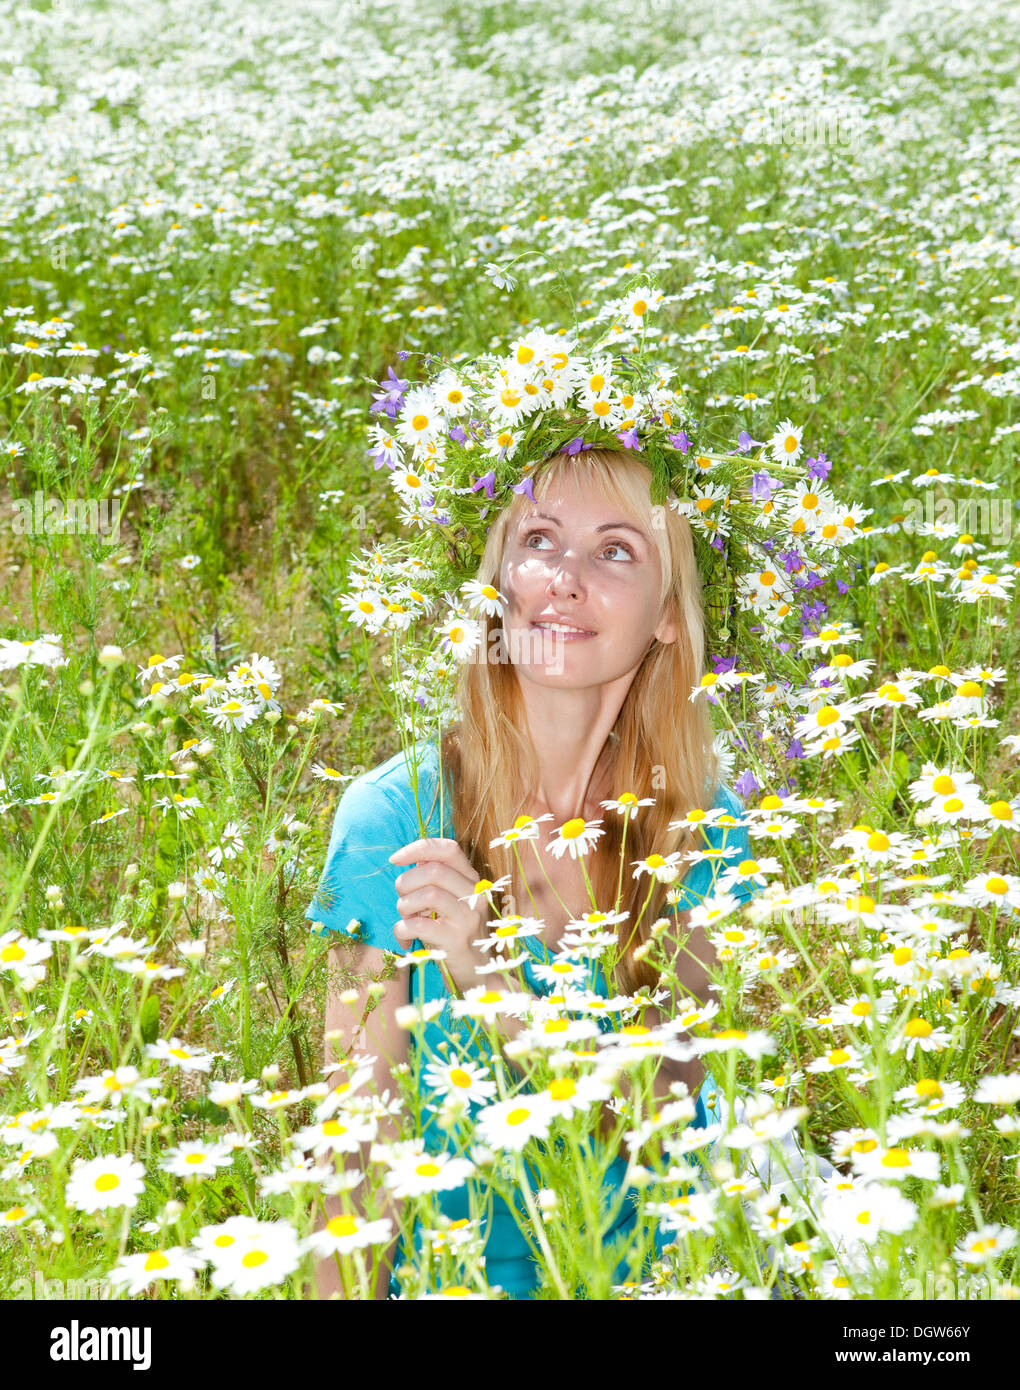 young woman in a wreath from wild flowers Stock Photo